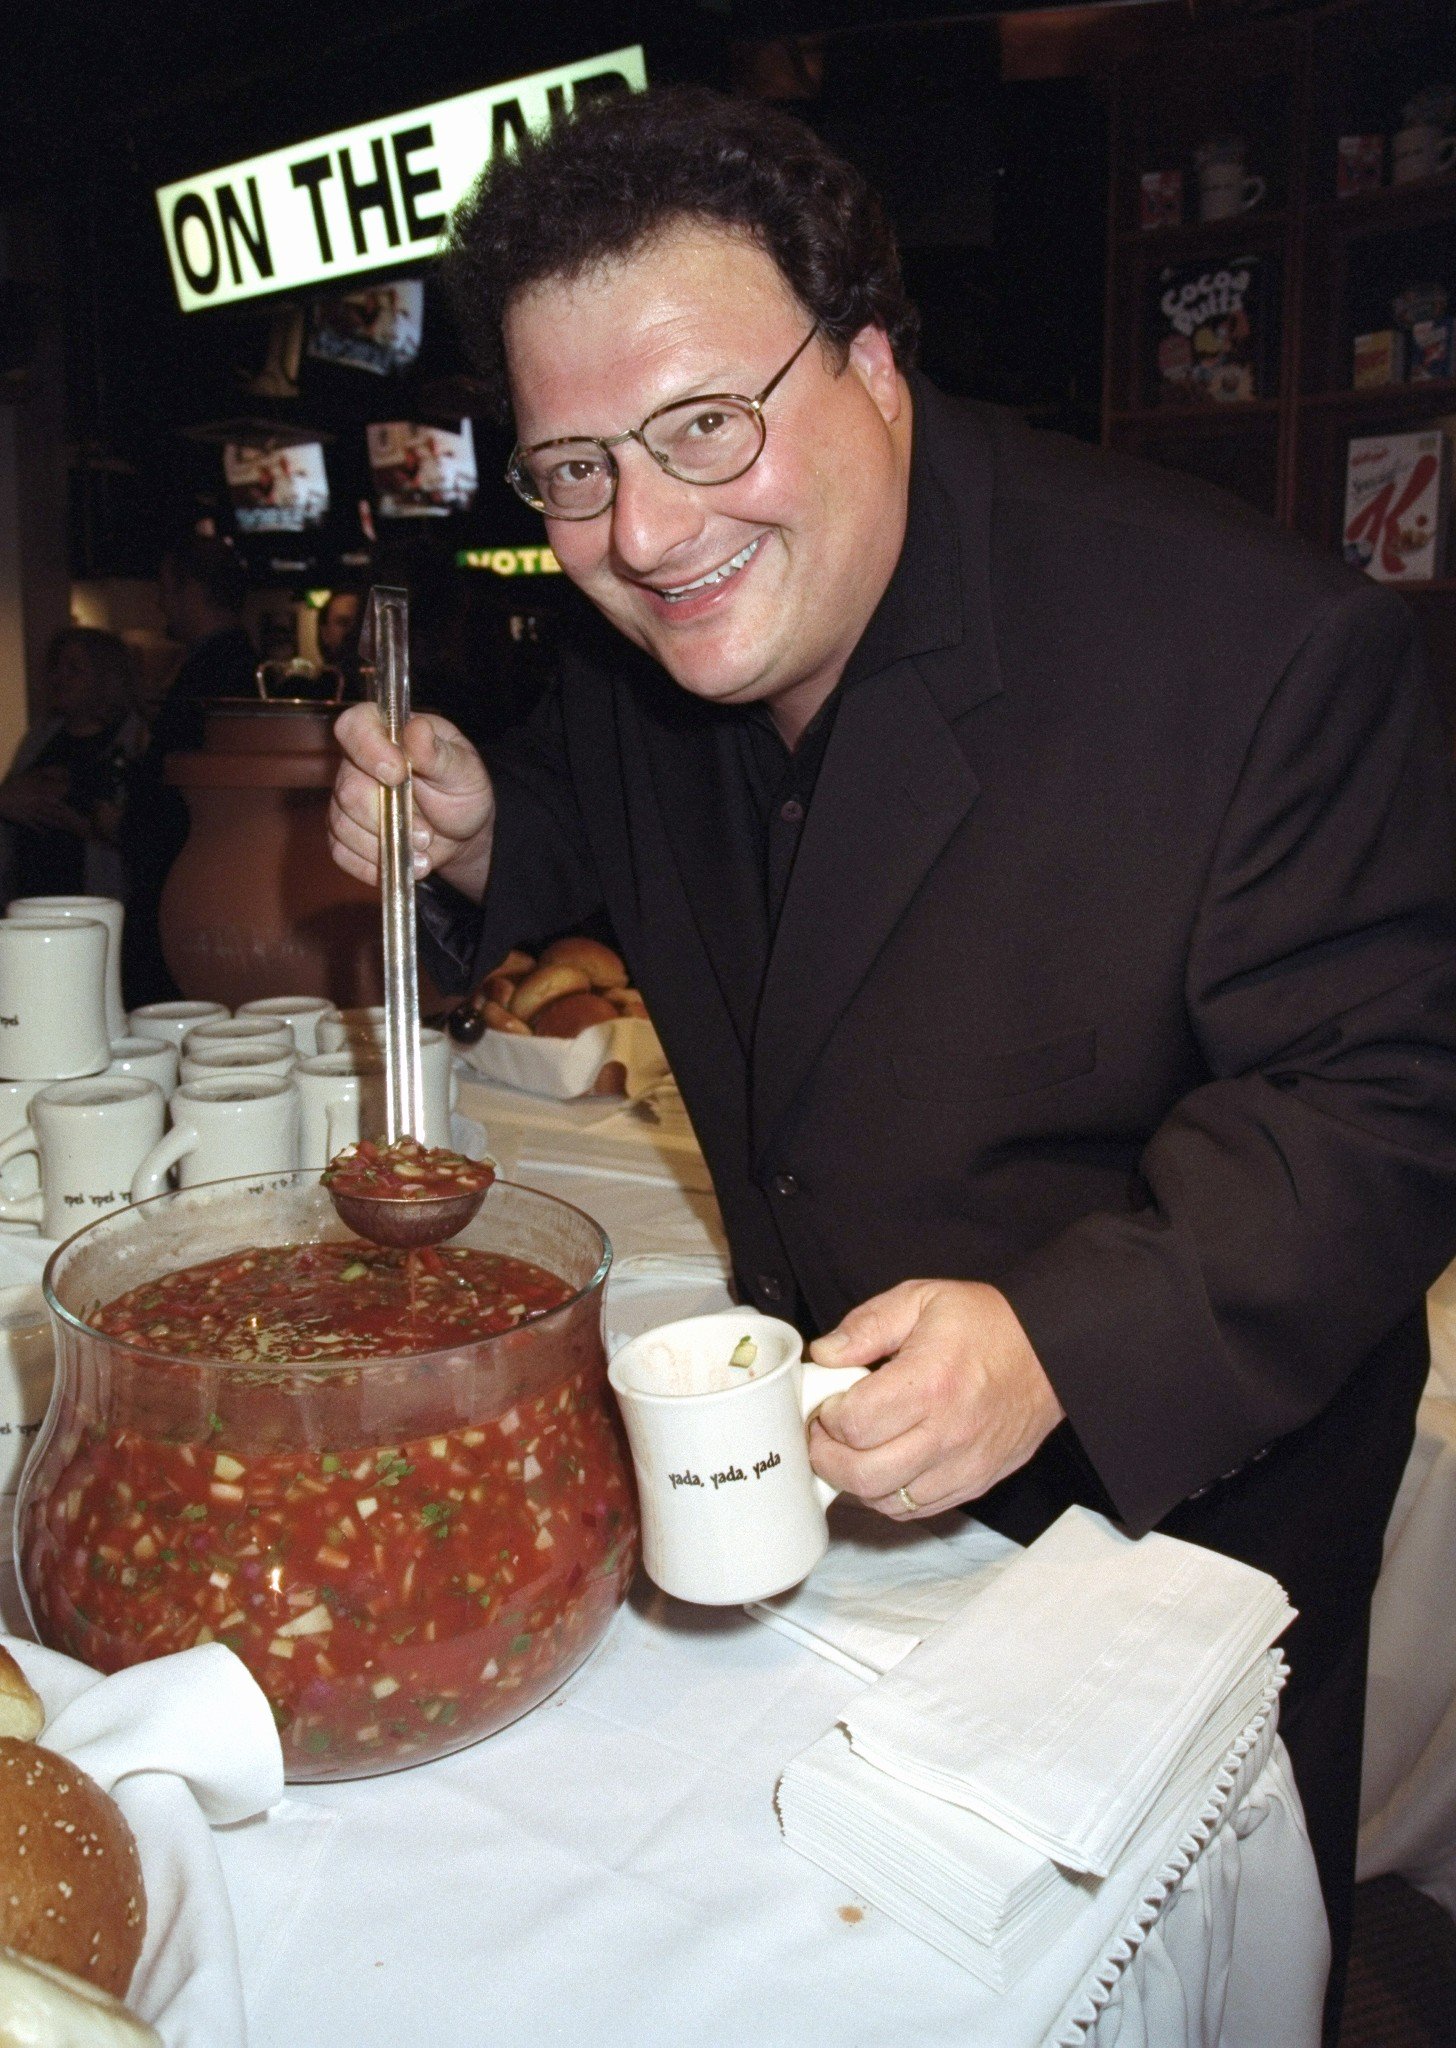 Wayne Knight at WNBC party at Television City, Rockefeller Center on May 14, 1998. | Source: Getty Images